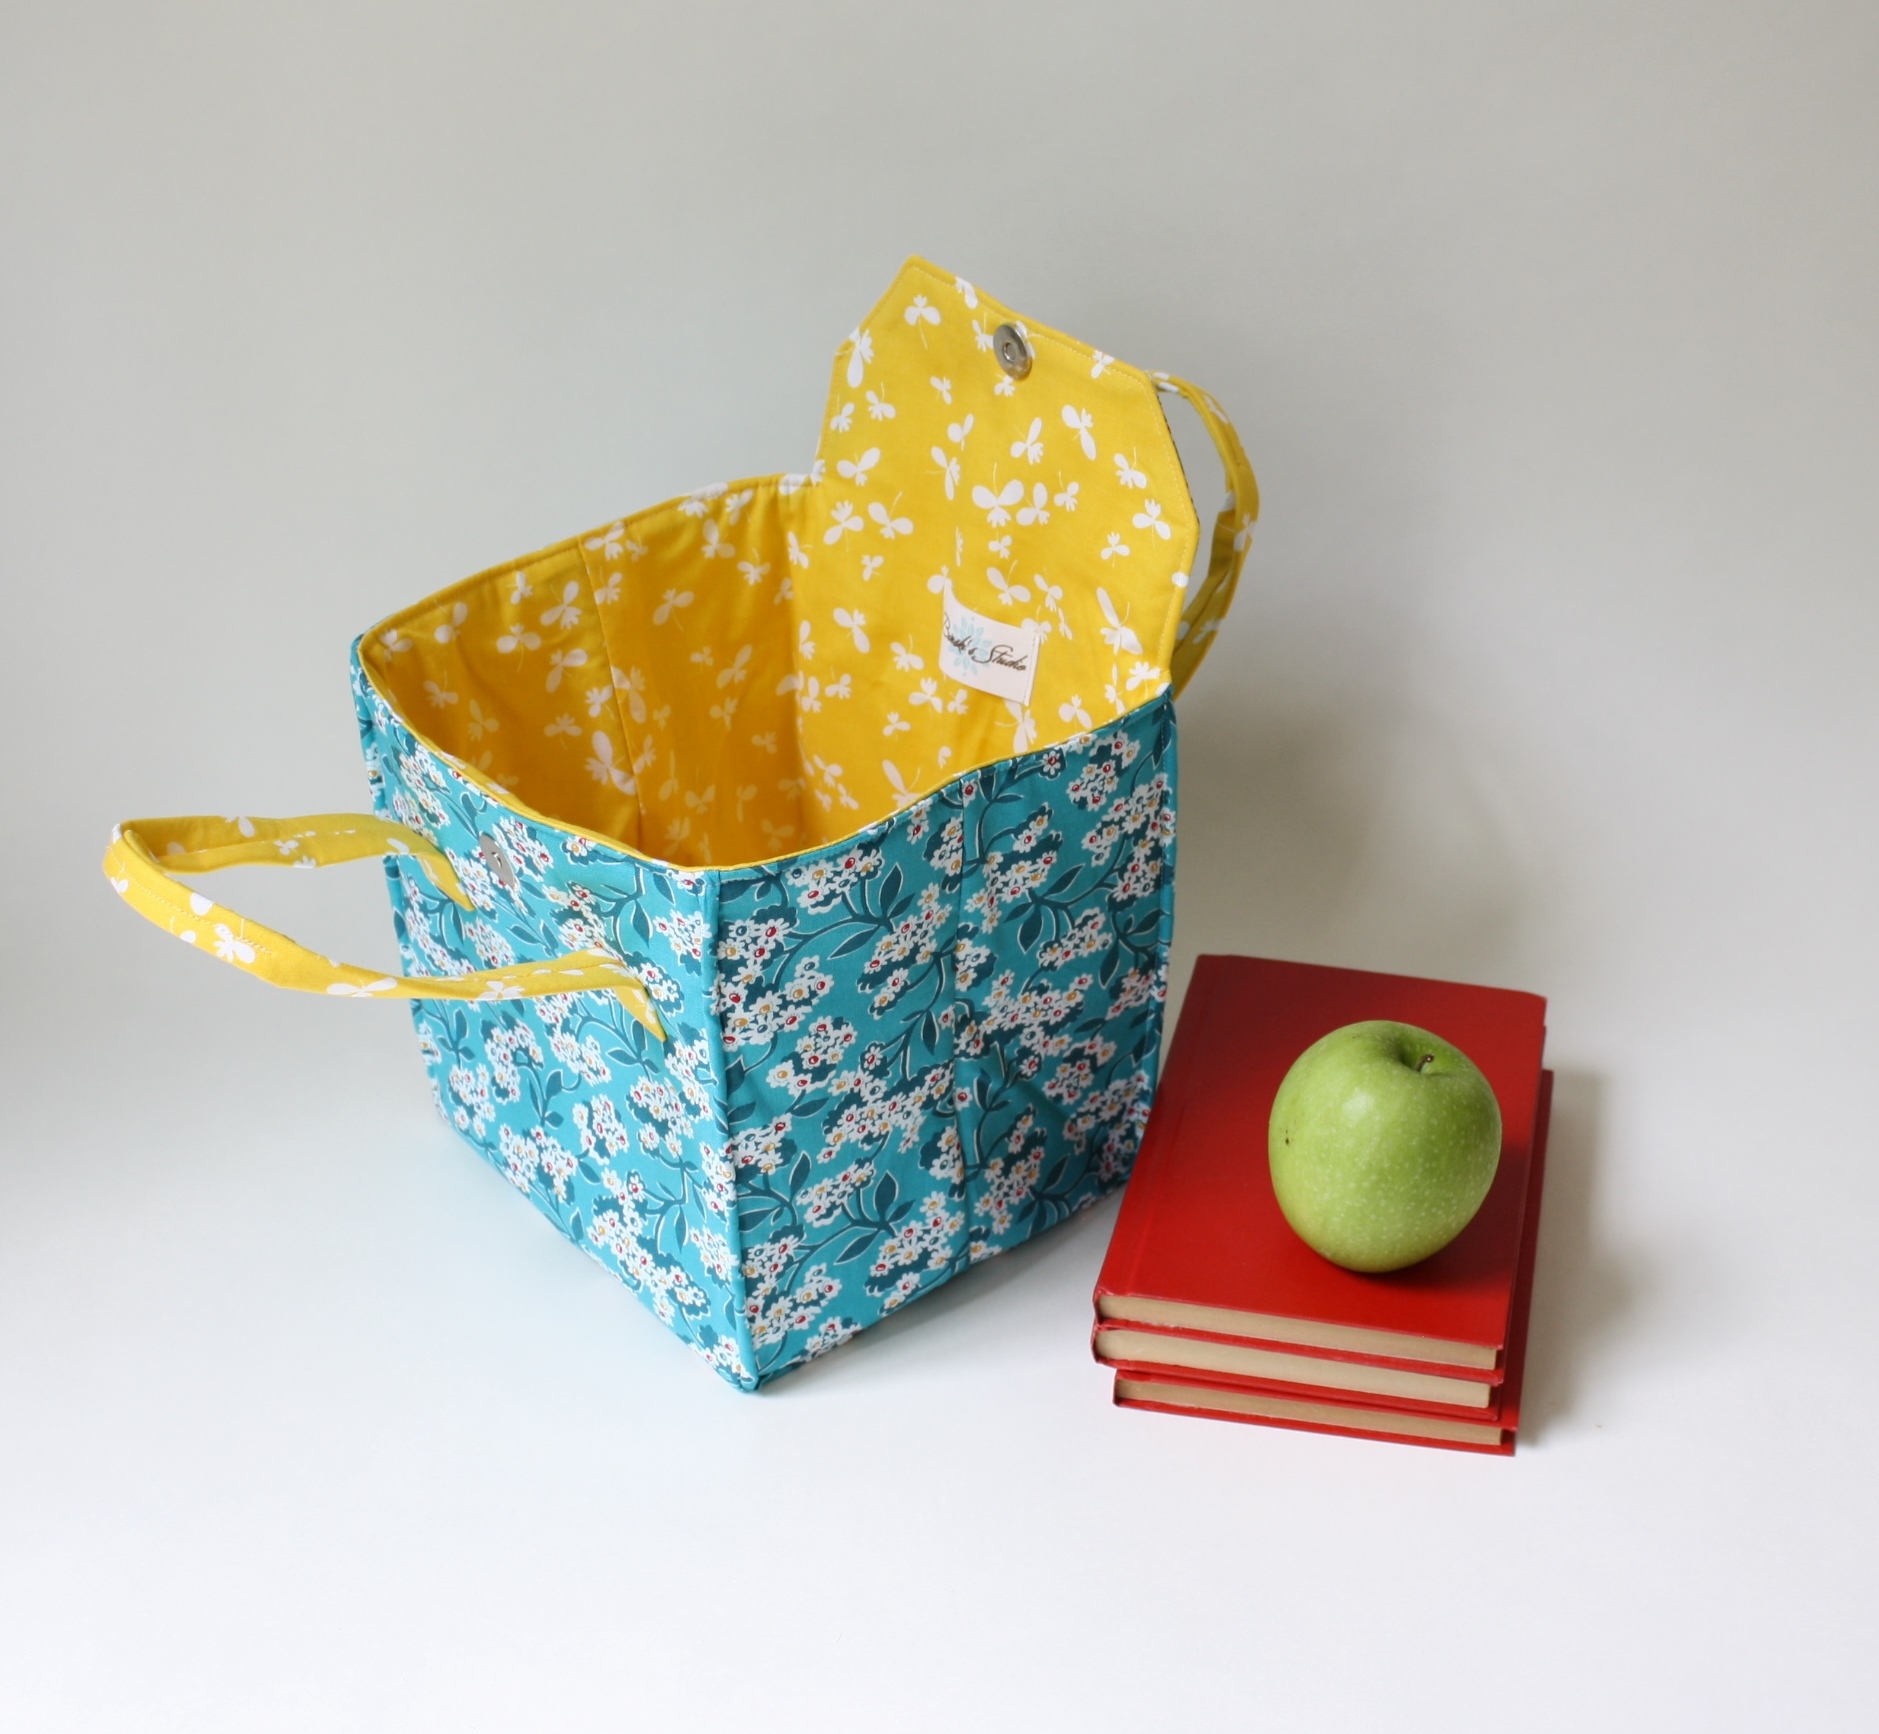 Insulated Lunch Bag in Mimosa - Insulated Lunch Tote - Bento Box Carrier - Ready to Ship